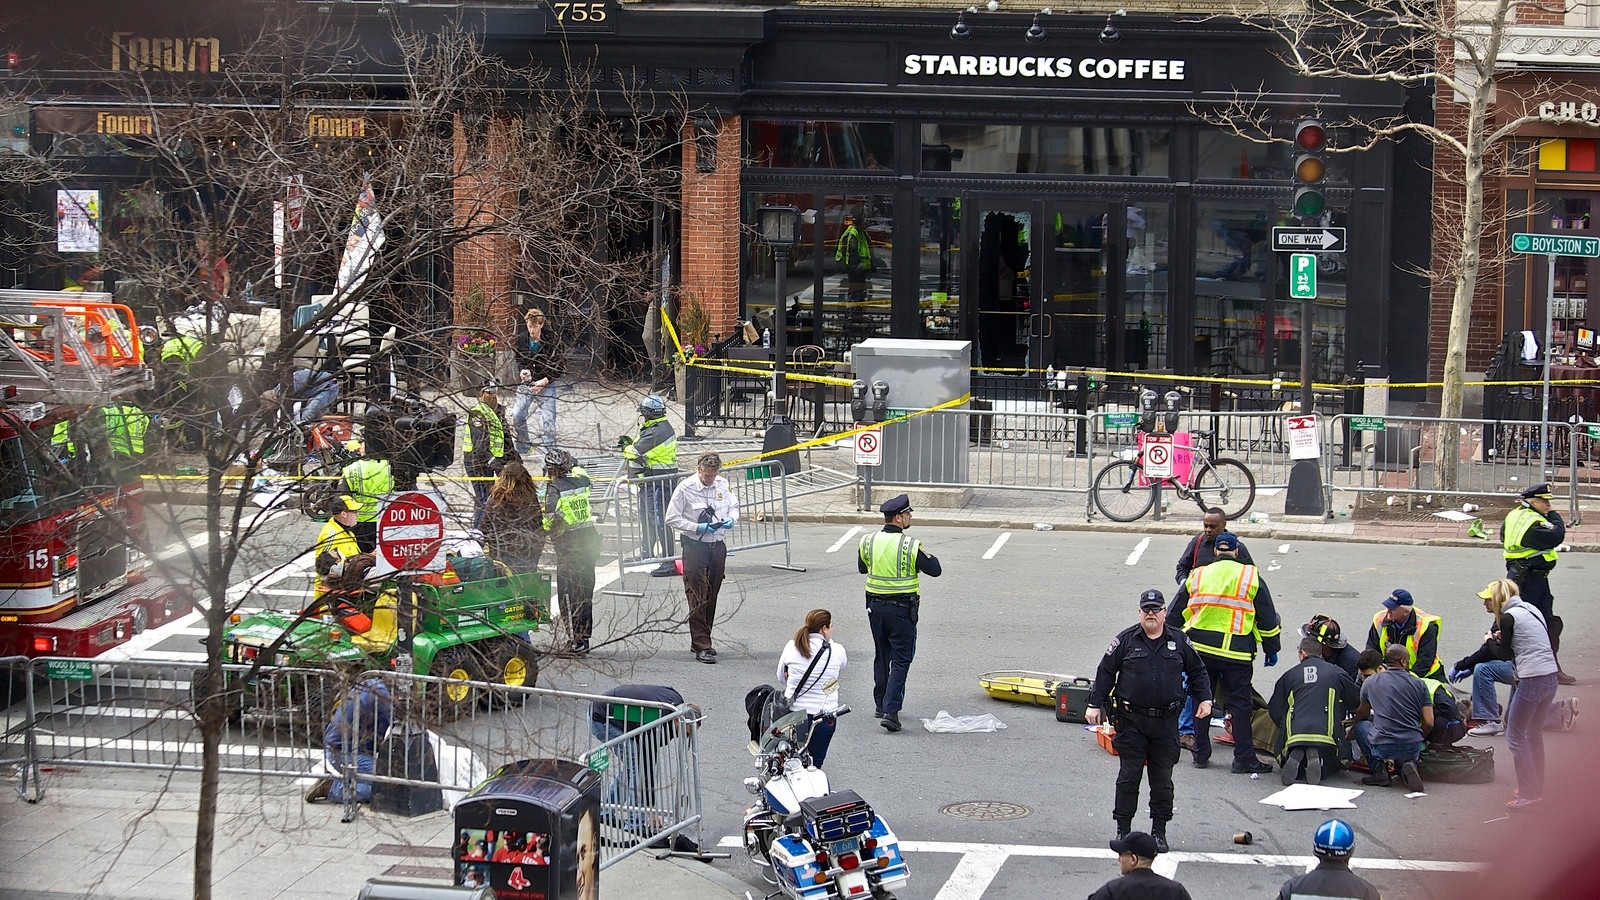 What Should We Learn From Boston? | RAND